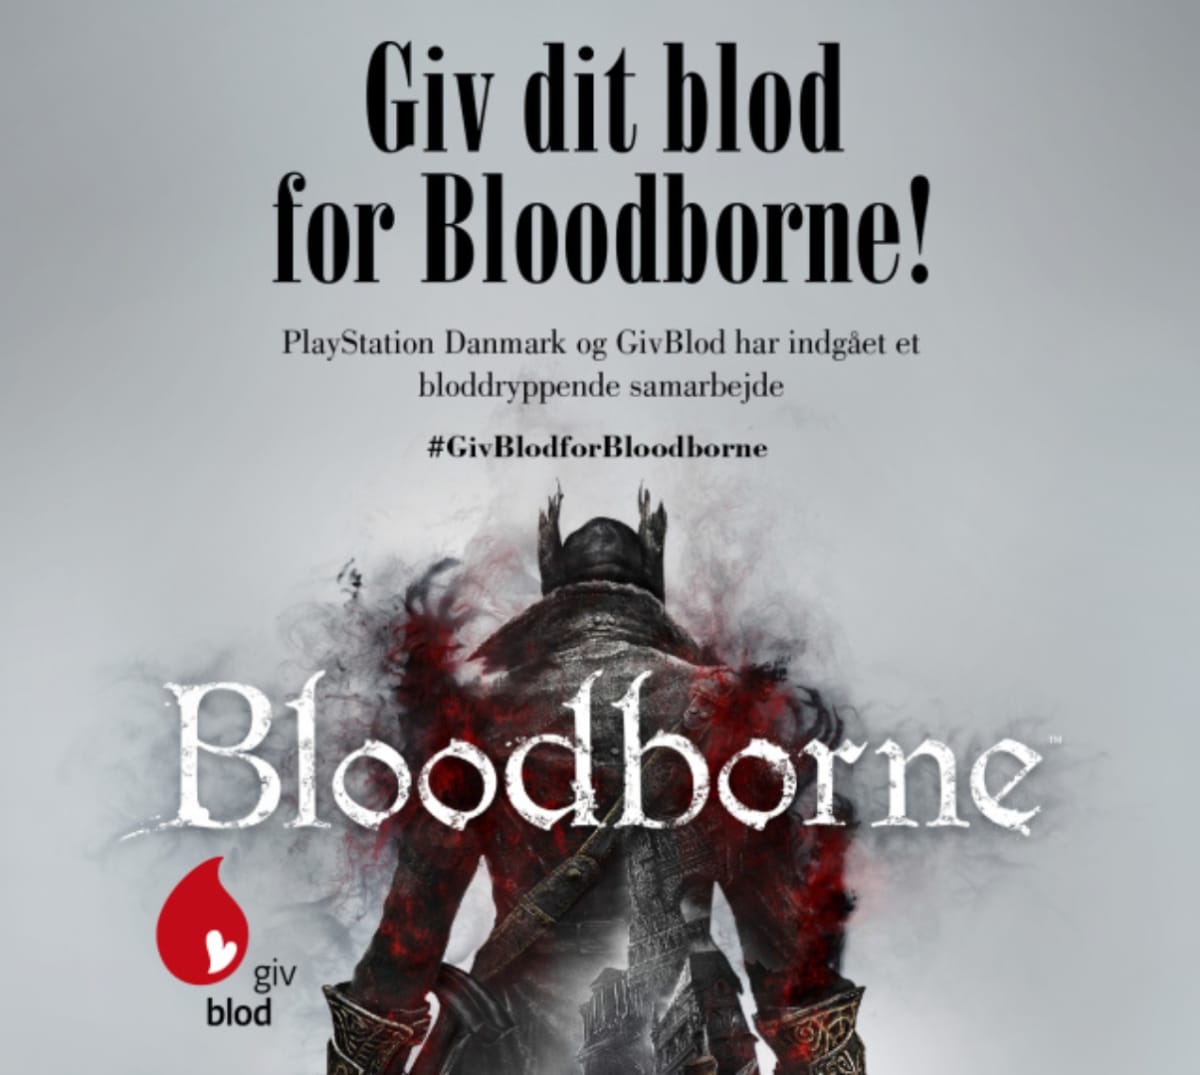 artwork depicting a man standing facing away from the viewer while text in Danish mentioned free games for donating blood. 